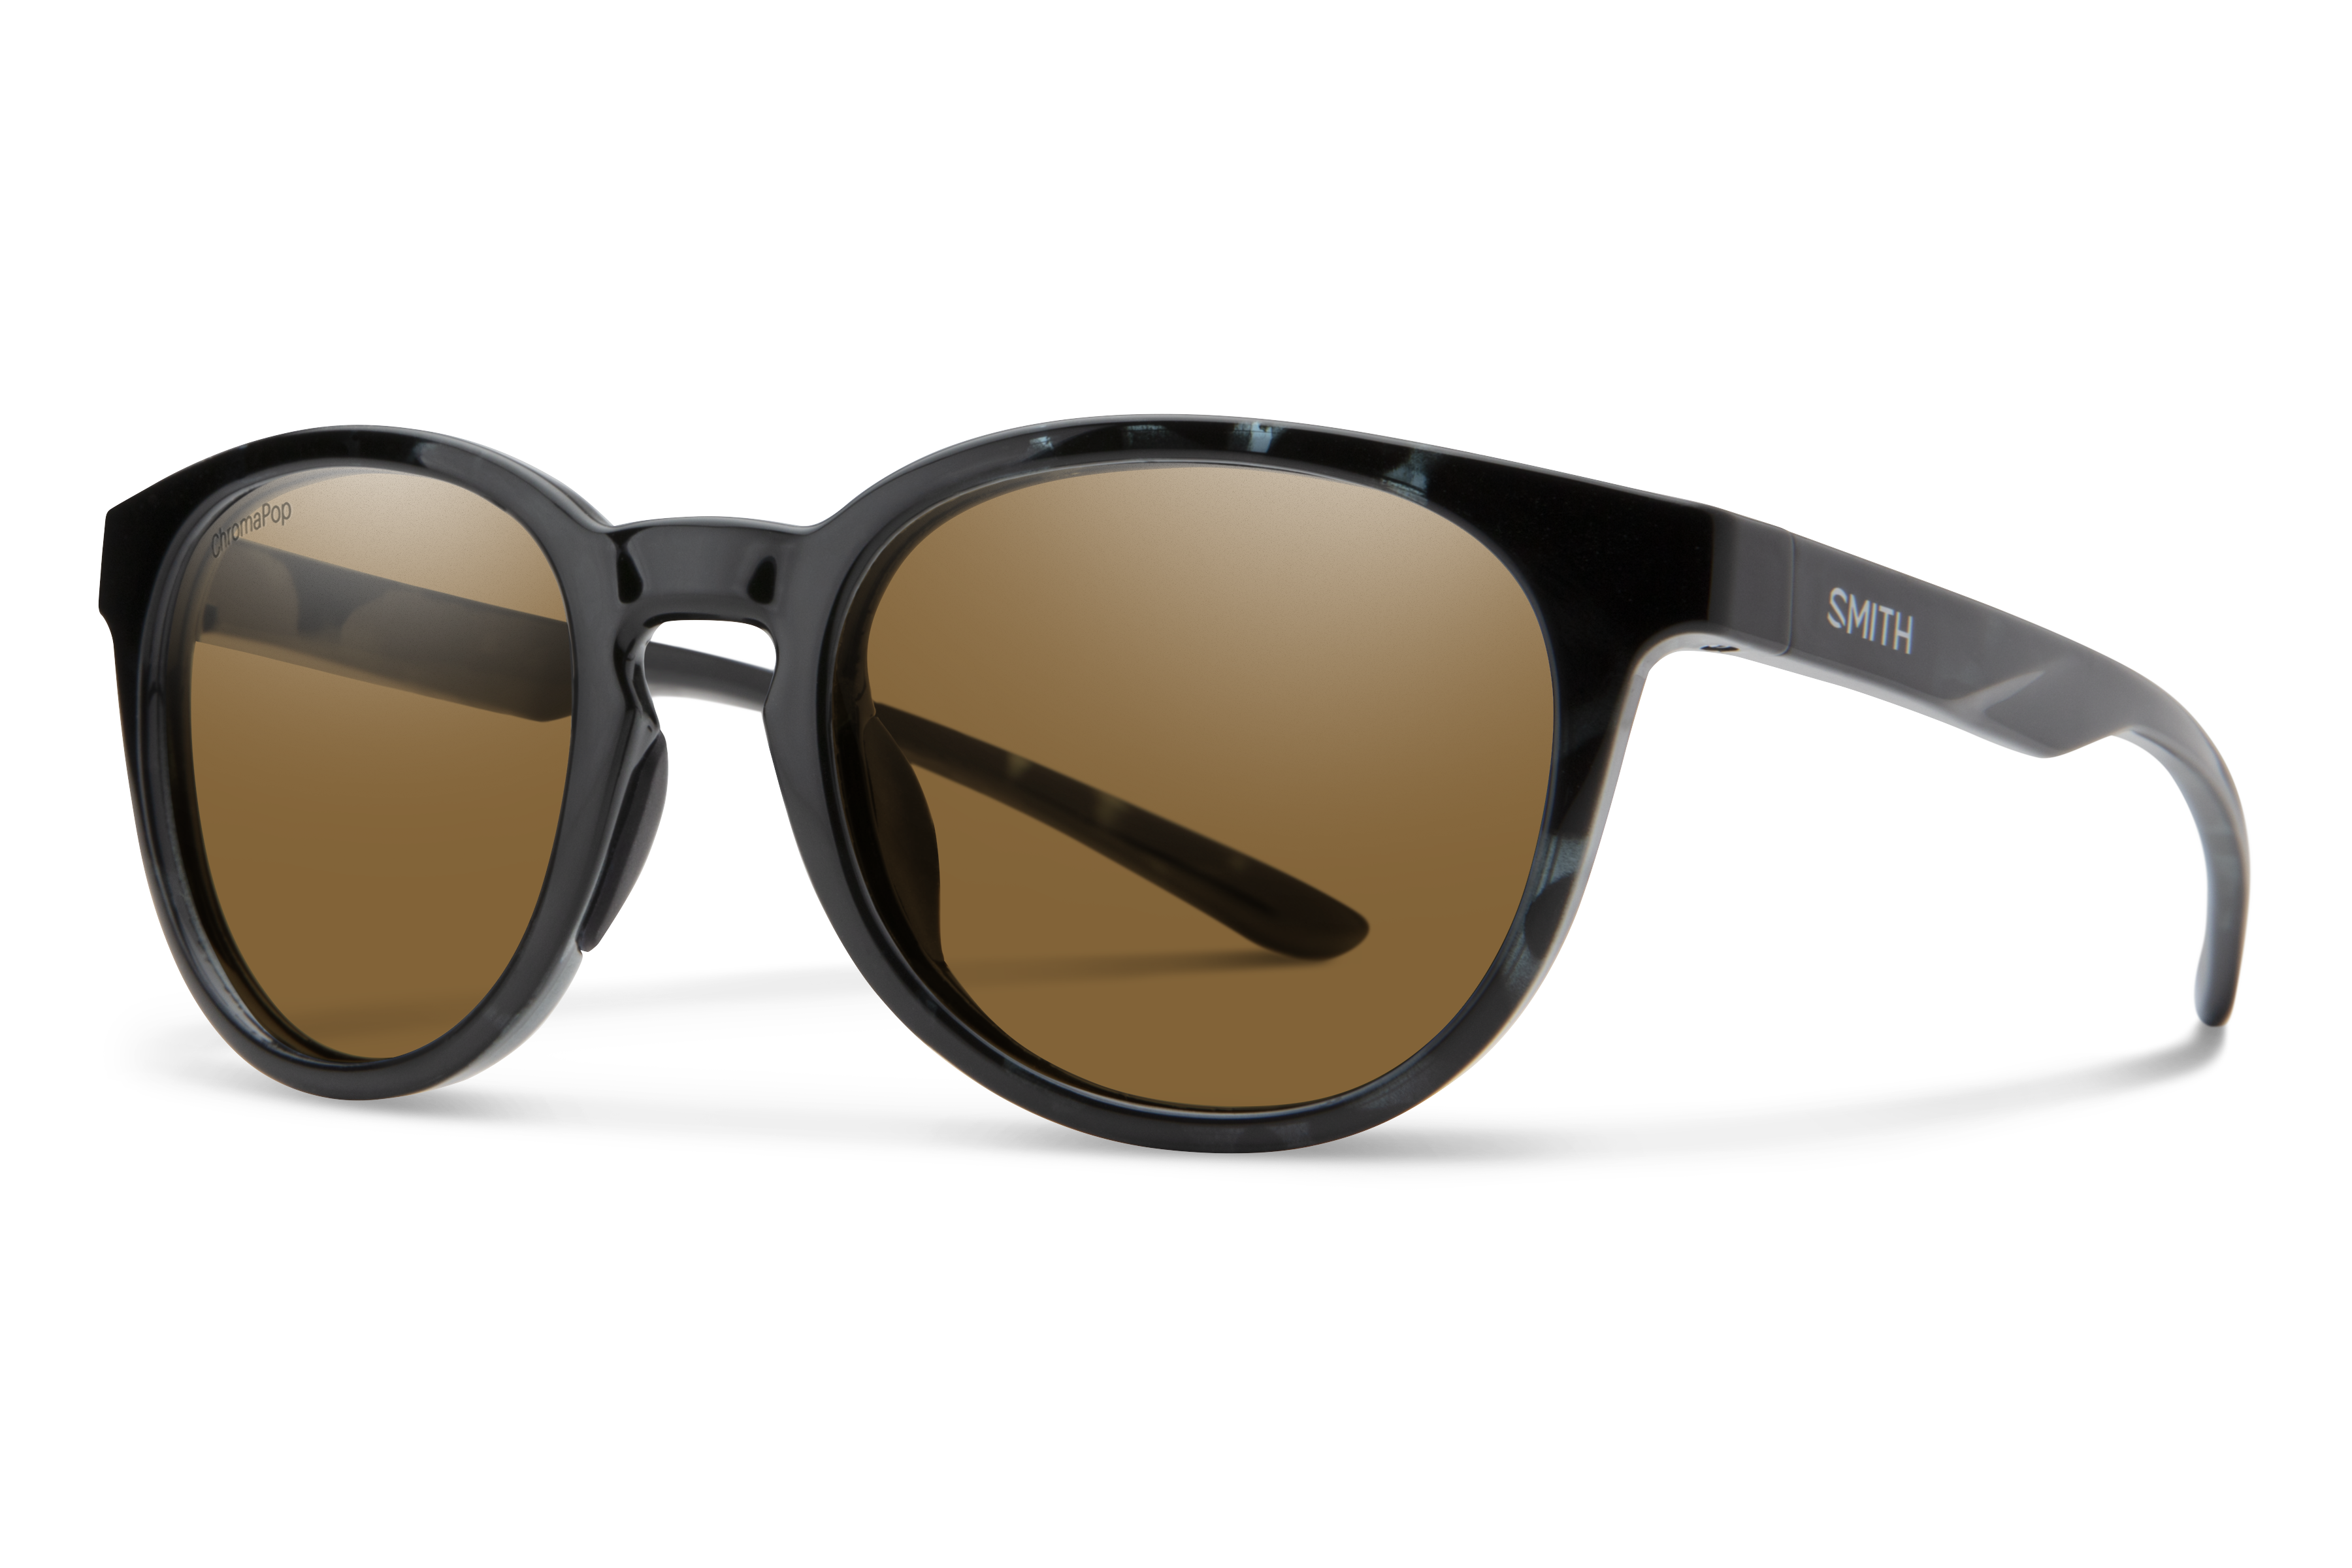 Buy Eastbank RX starting at USD 288.00 | Smith Optics